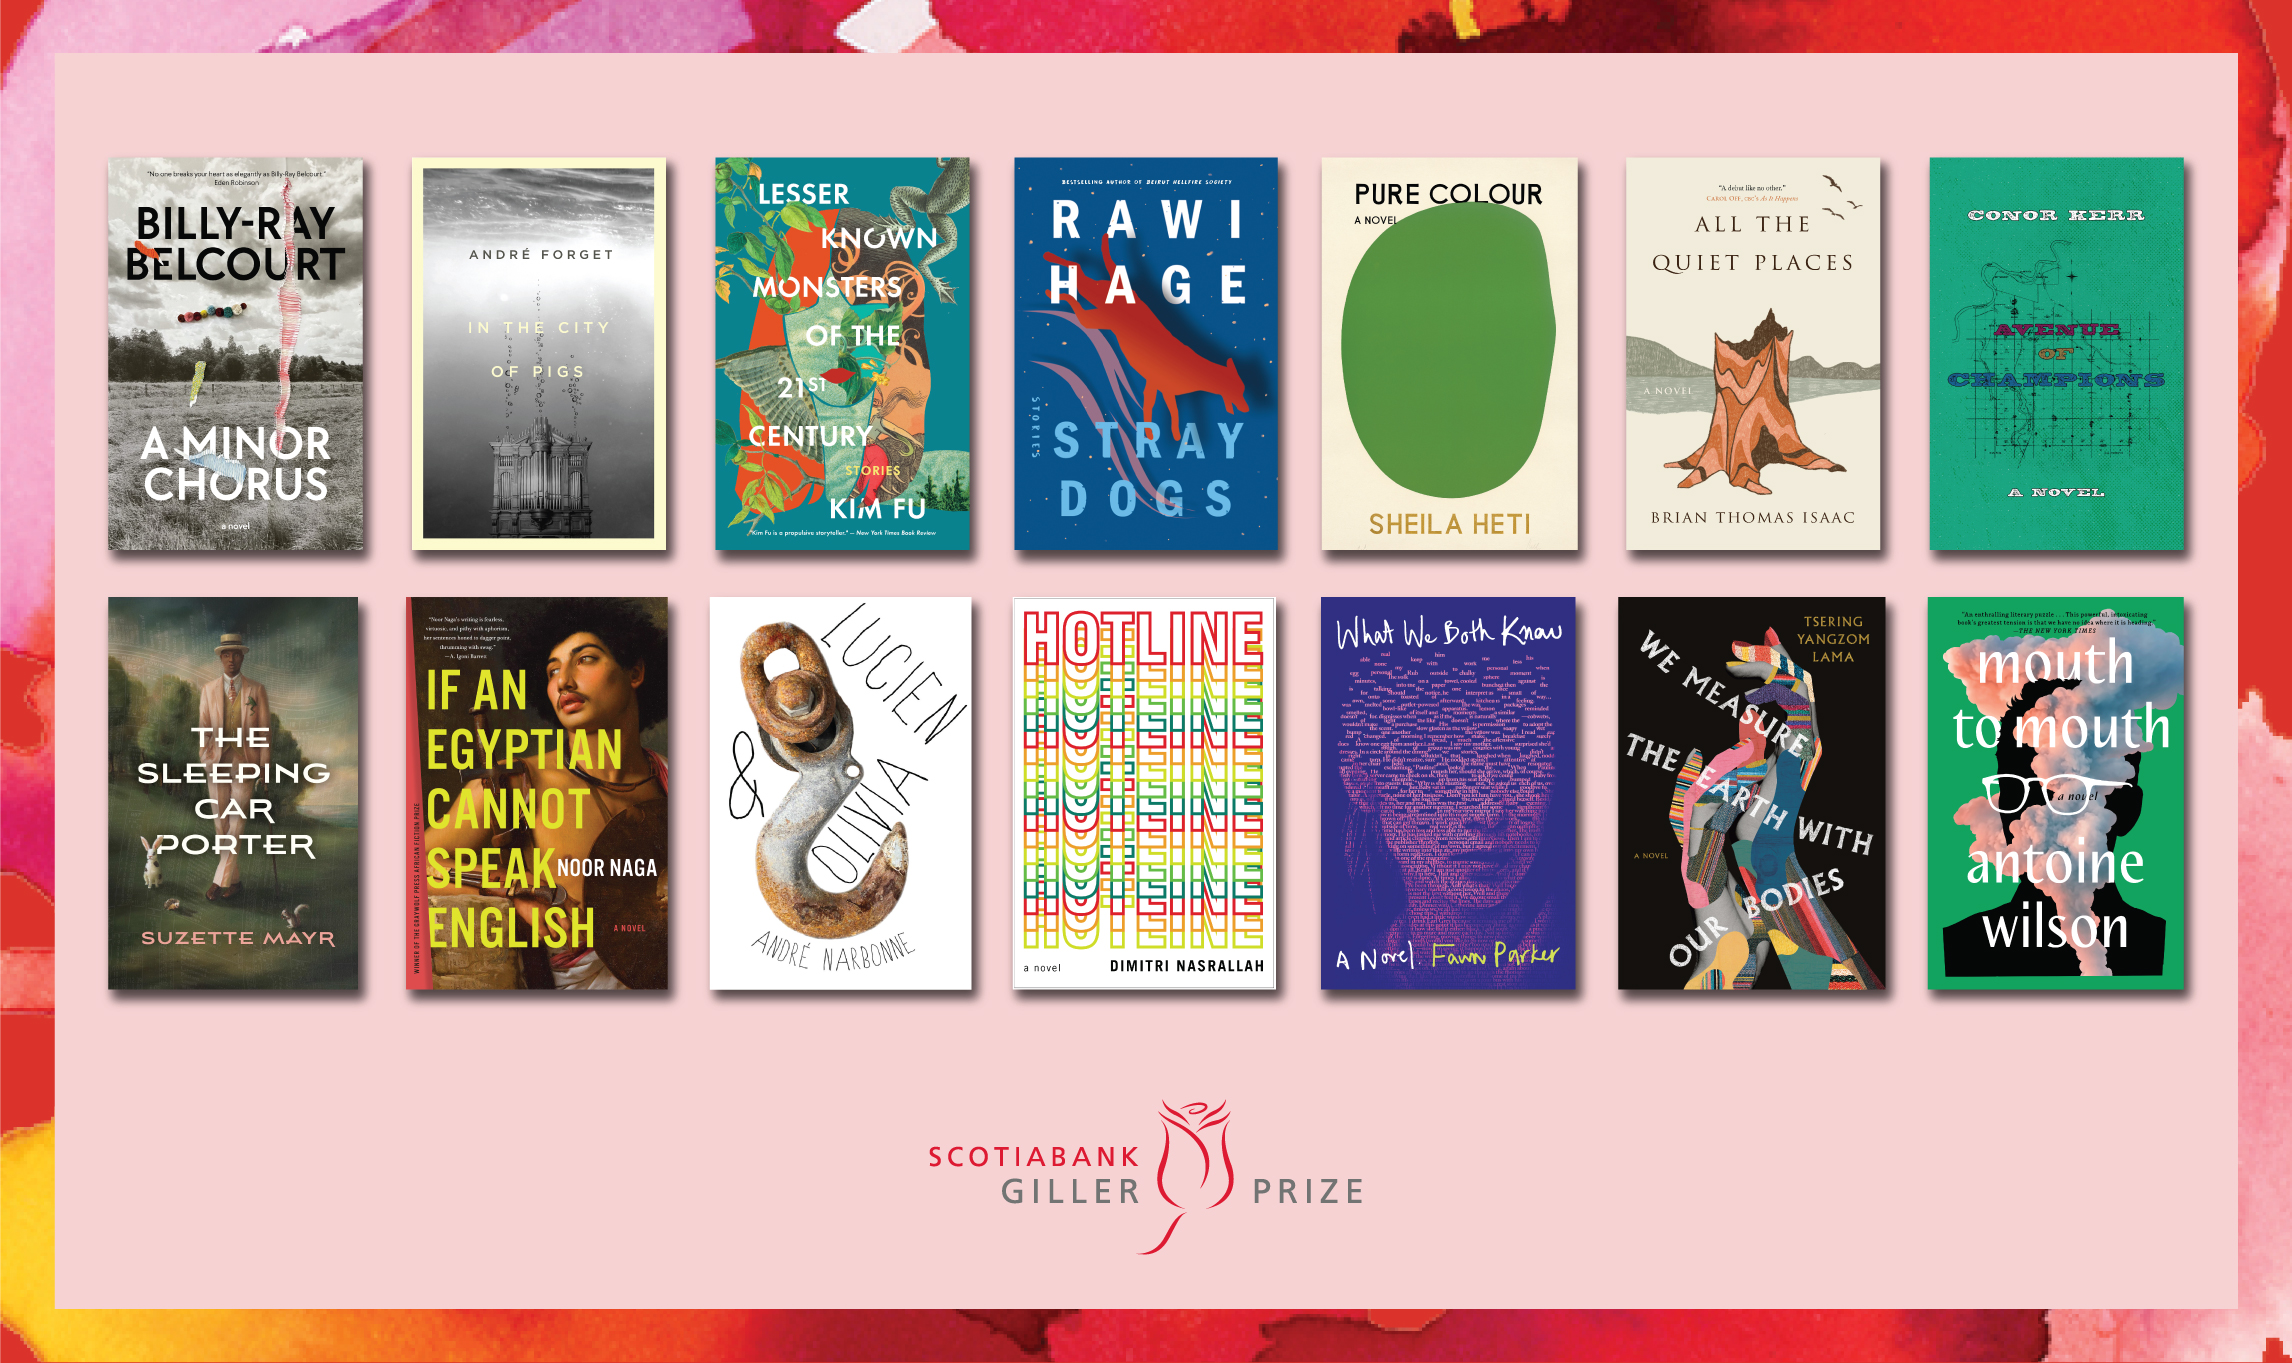 The covers of the 14 books longlisted for the 2022 Giller Prize set on a pink background.